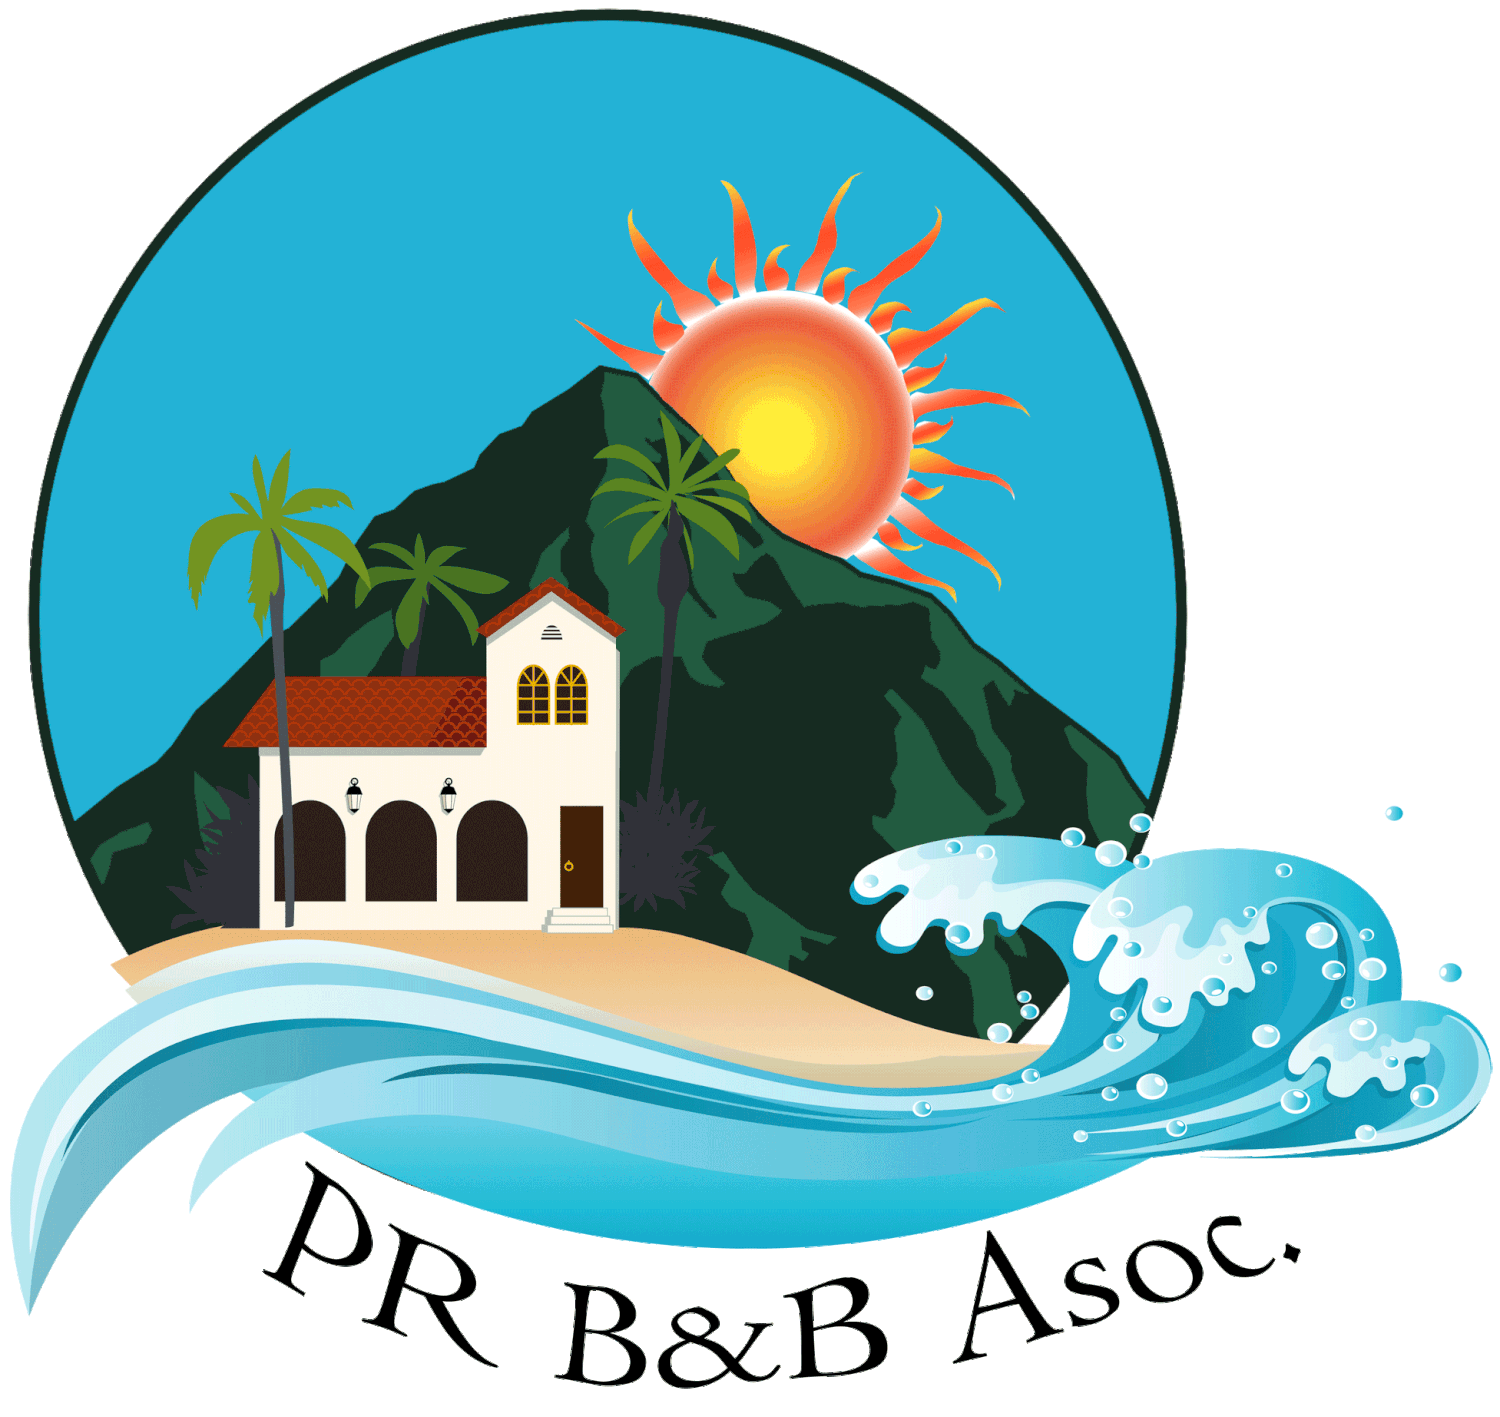 Casa isabel bed breakfast. Grilling clipart food puerto rico